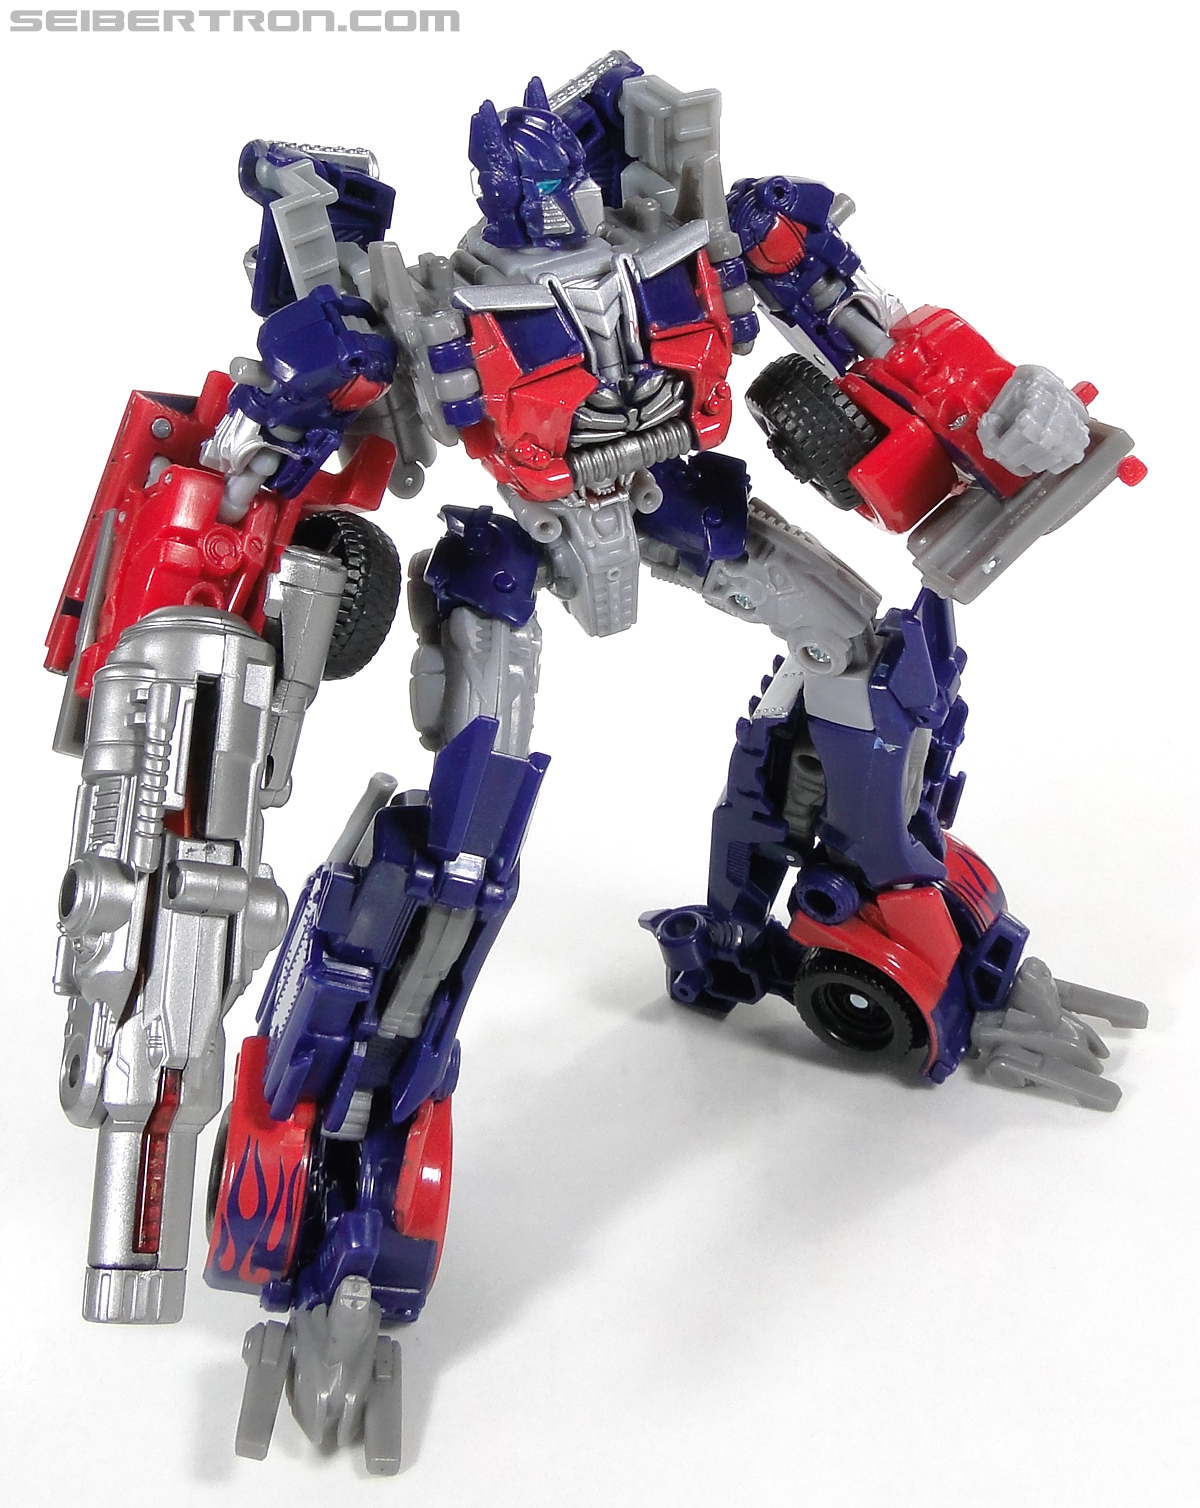 Transformers Dark of the Moon Optimus Prime with Mechtech Trailer (Image #163 of 248)